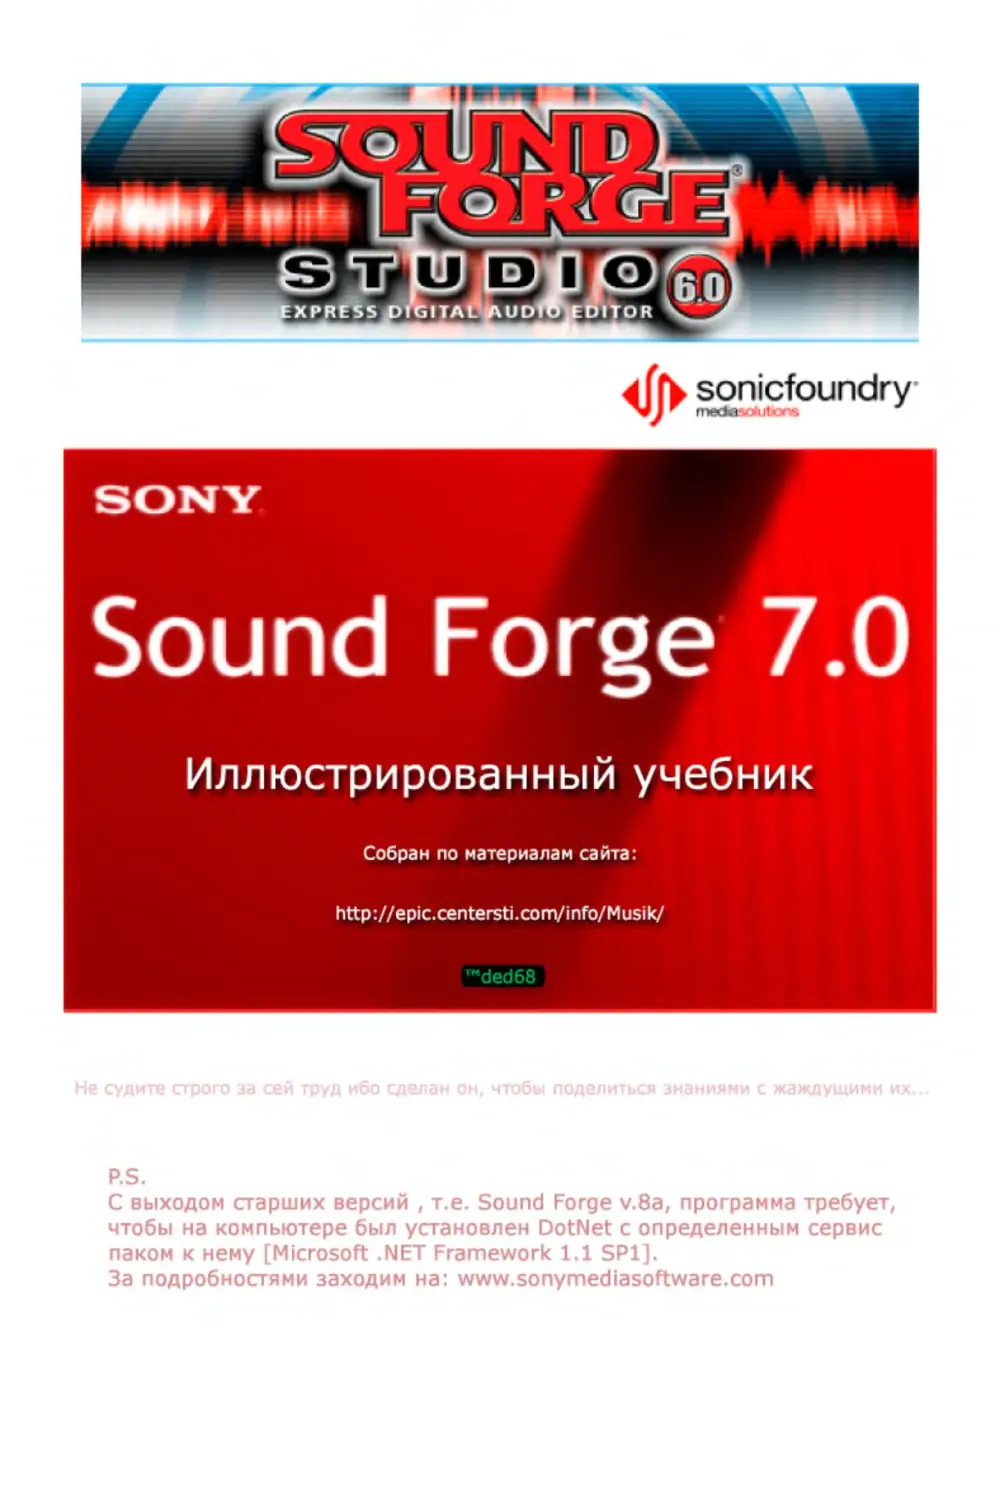 Sound Forge - Sonicfoundry